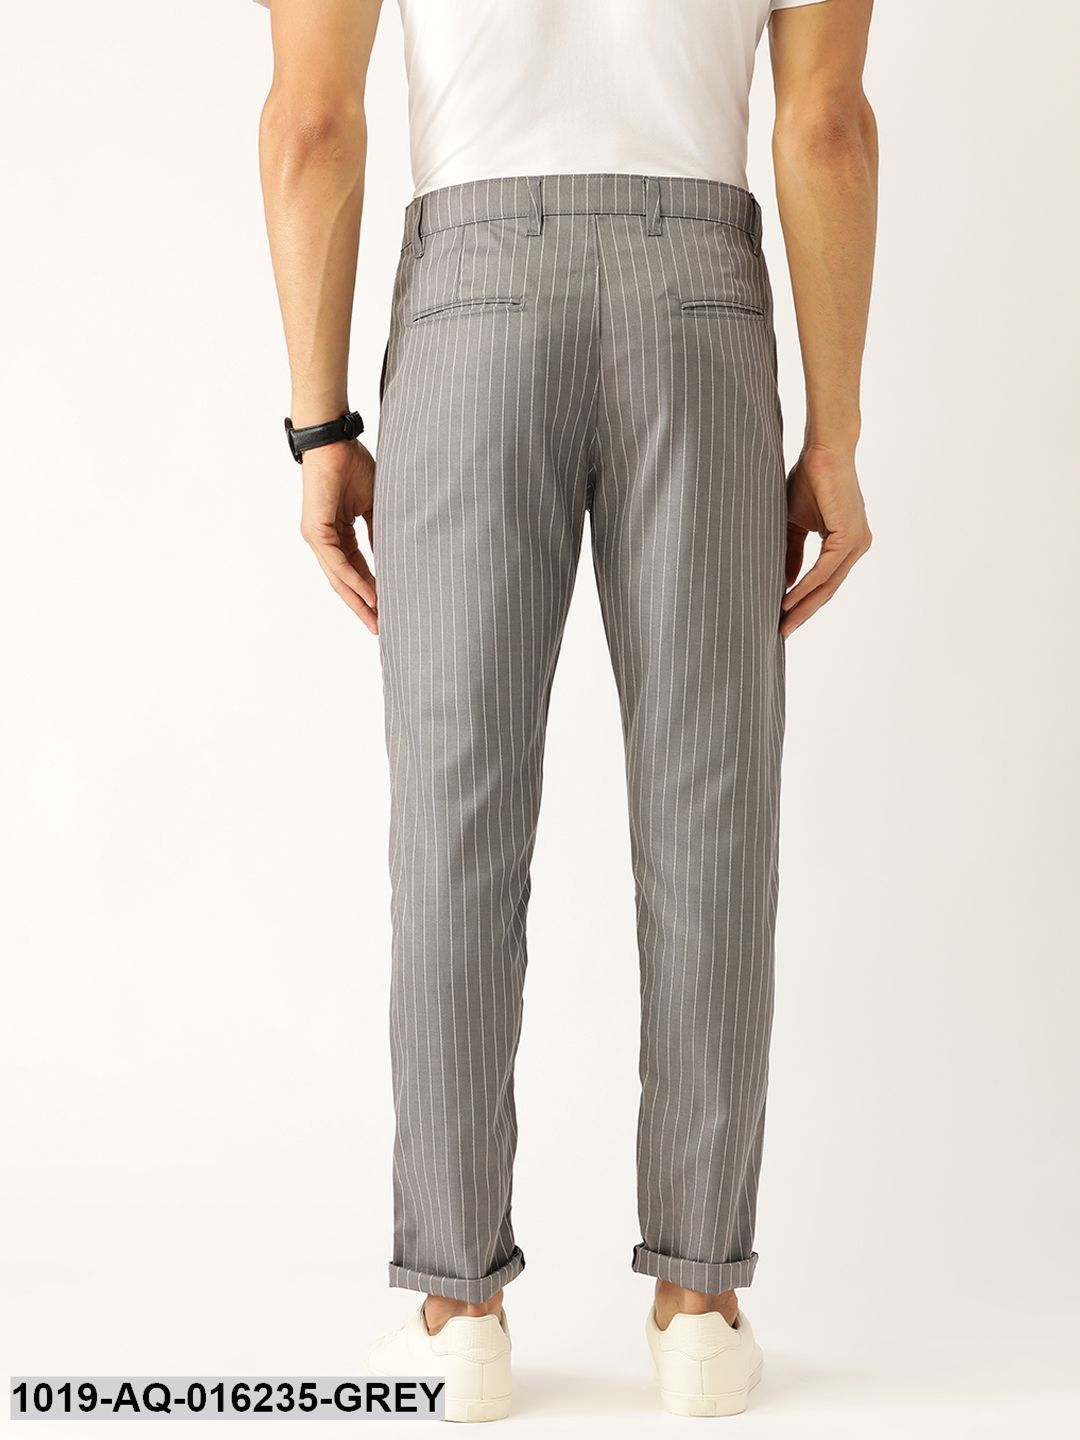 Men's Cotton Blend Grey & Off-white Striped Casual Trousers - Sojanya